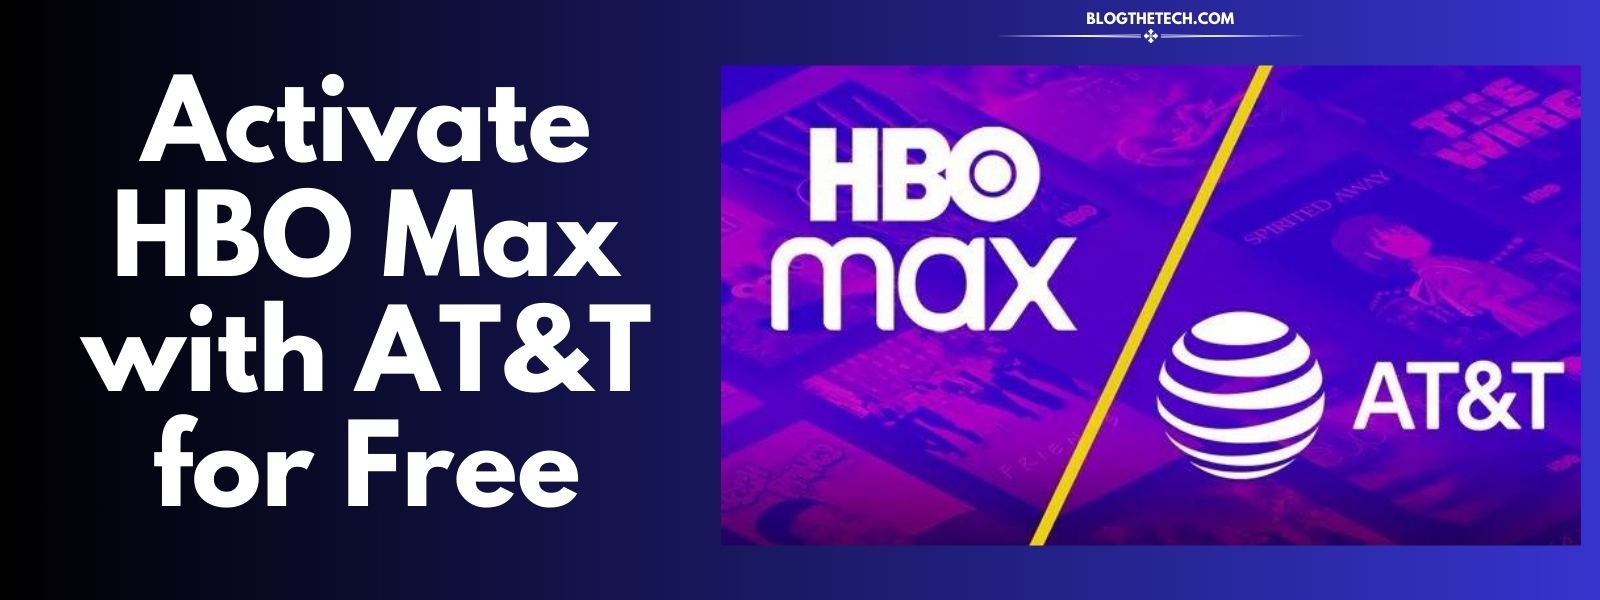 activate-hbo-max-with-att-featured